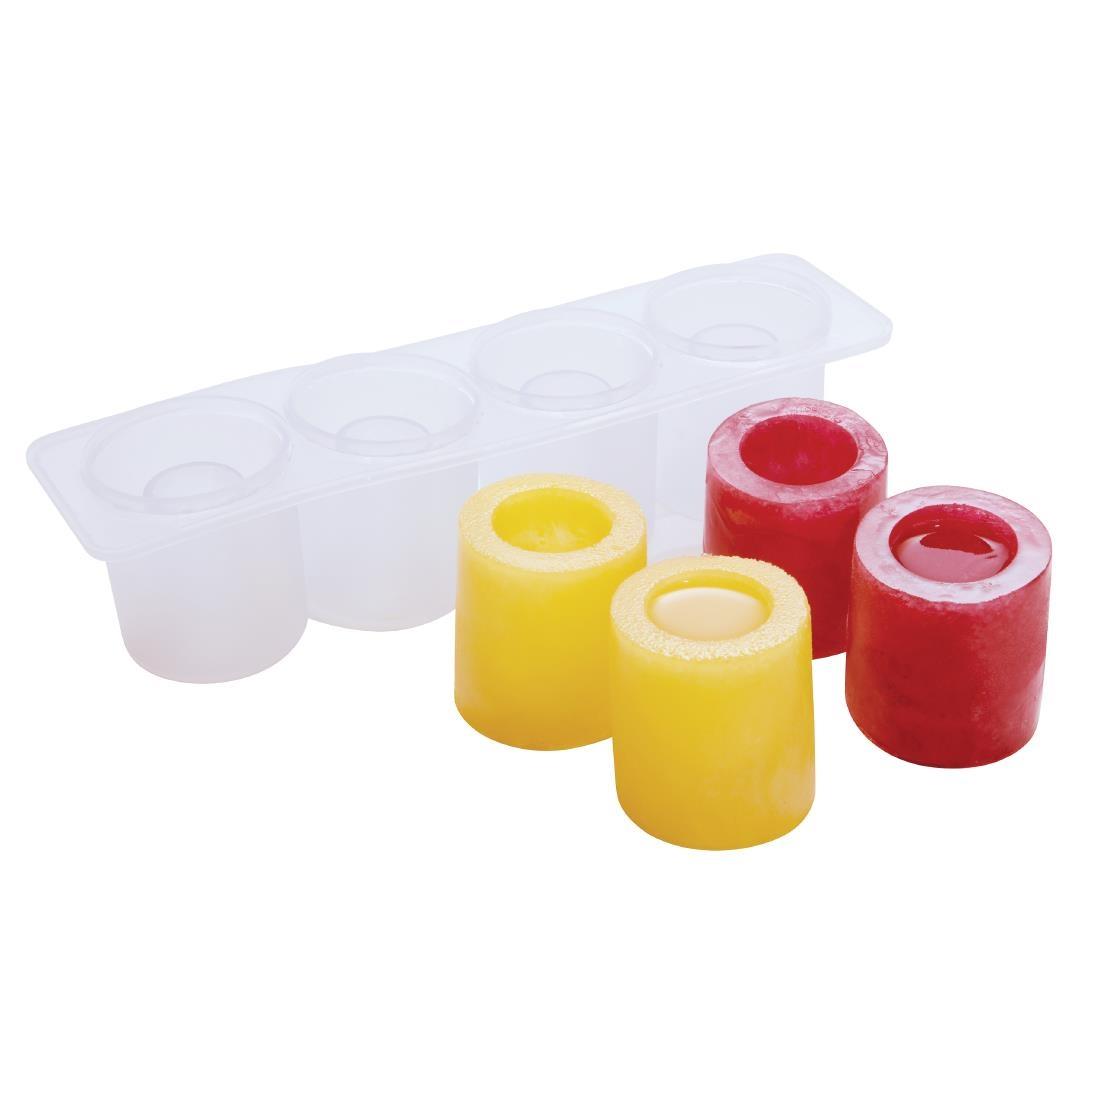 Beaumont Silicone Shot Glass Mould - CN937  - 2